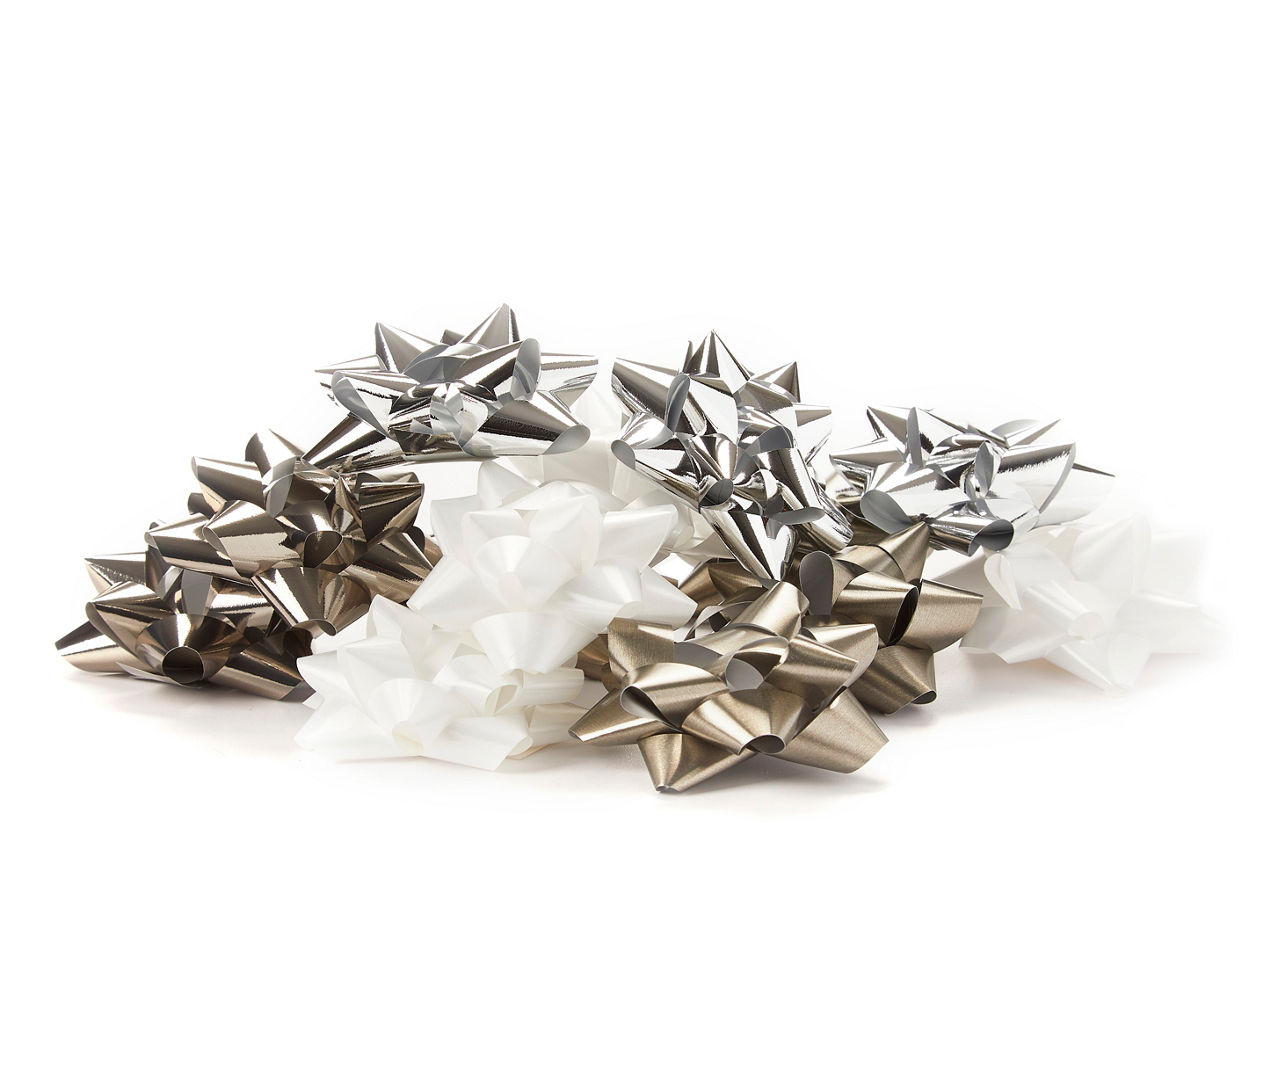 Christmas Gift Bows, White and Silver, 10 Pack - Paper Things